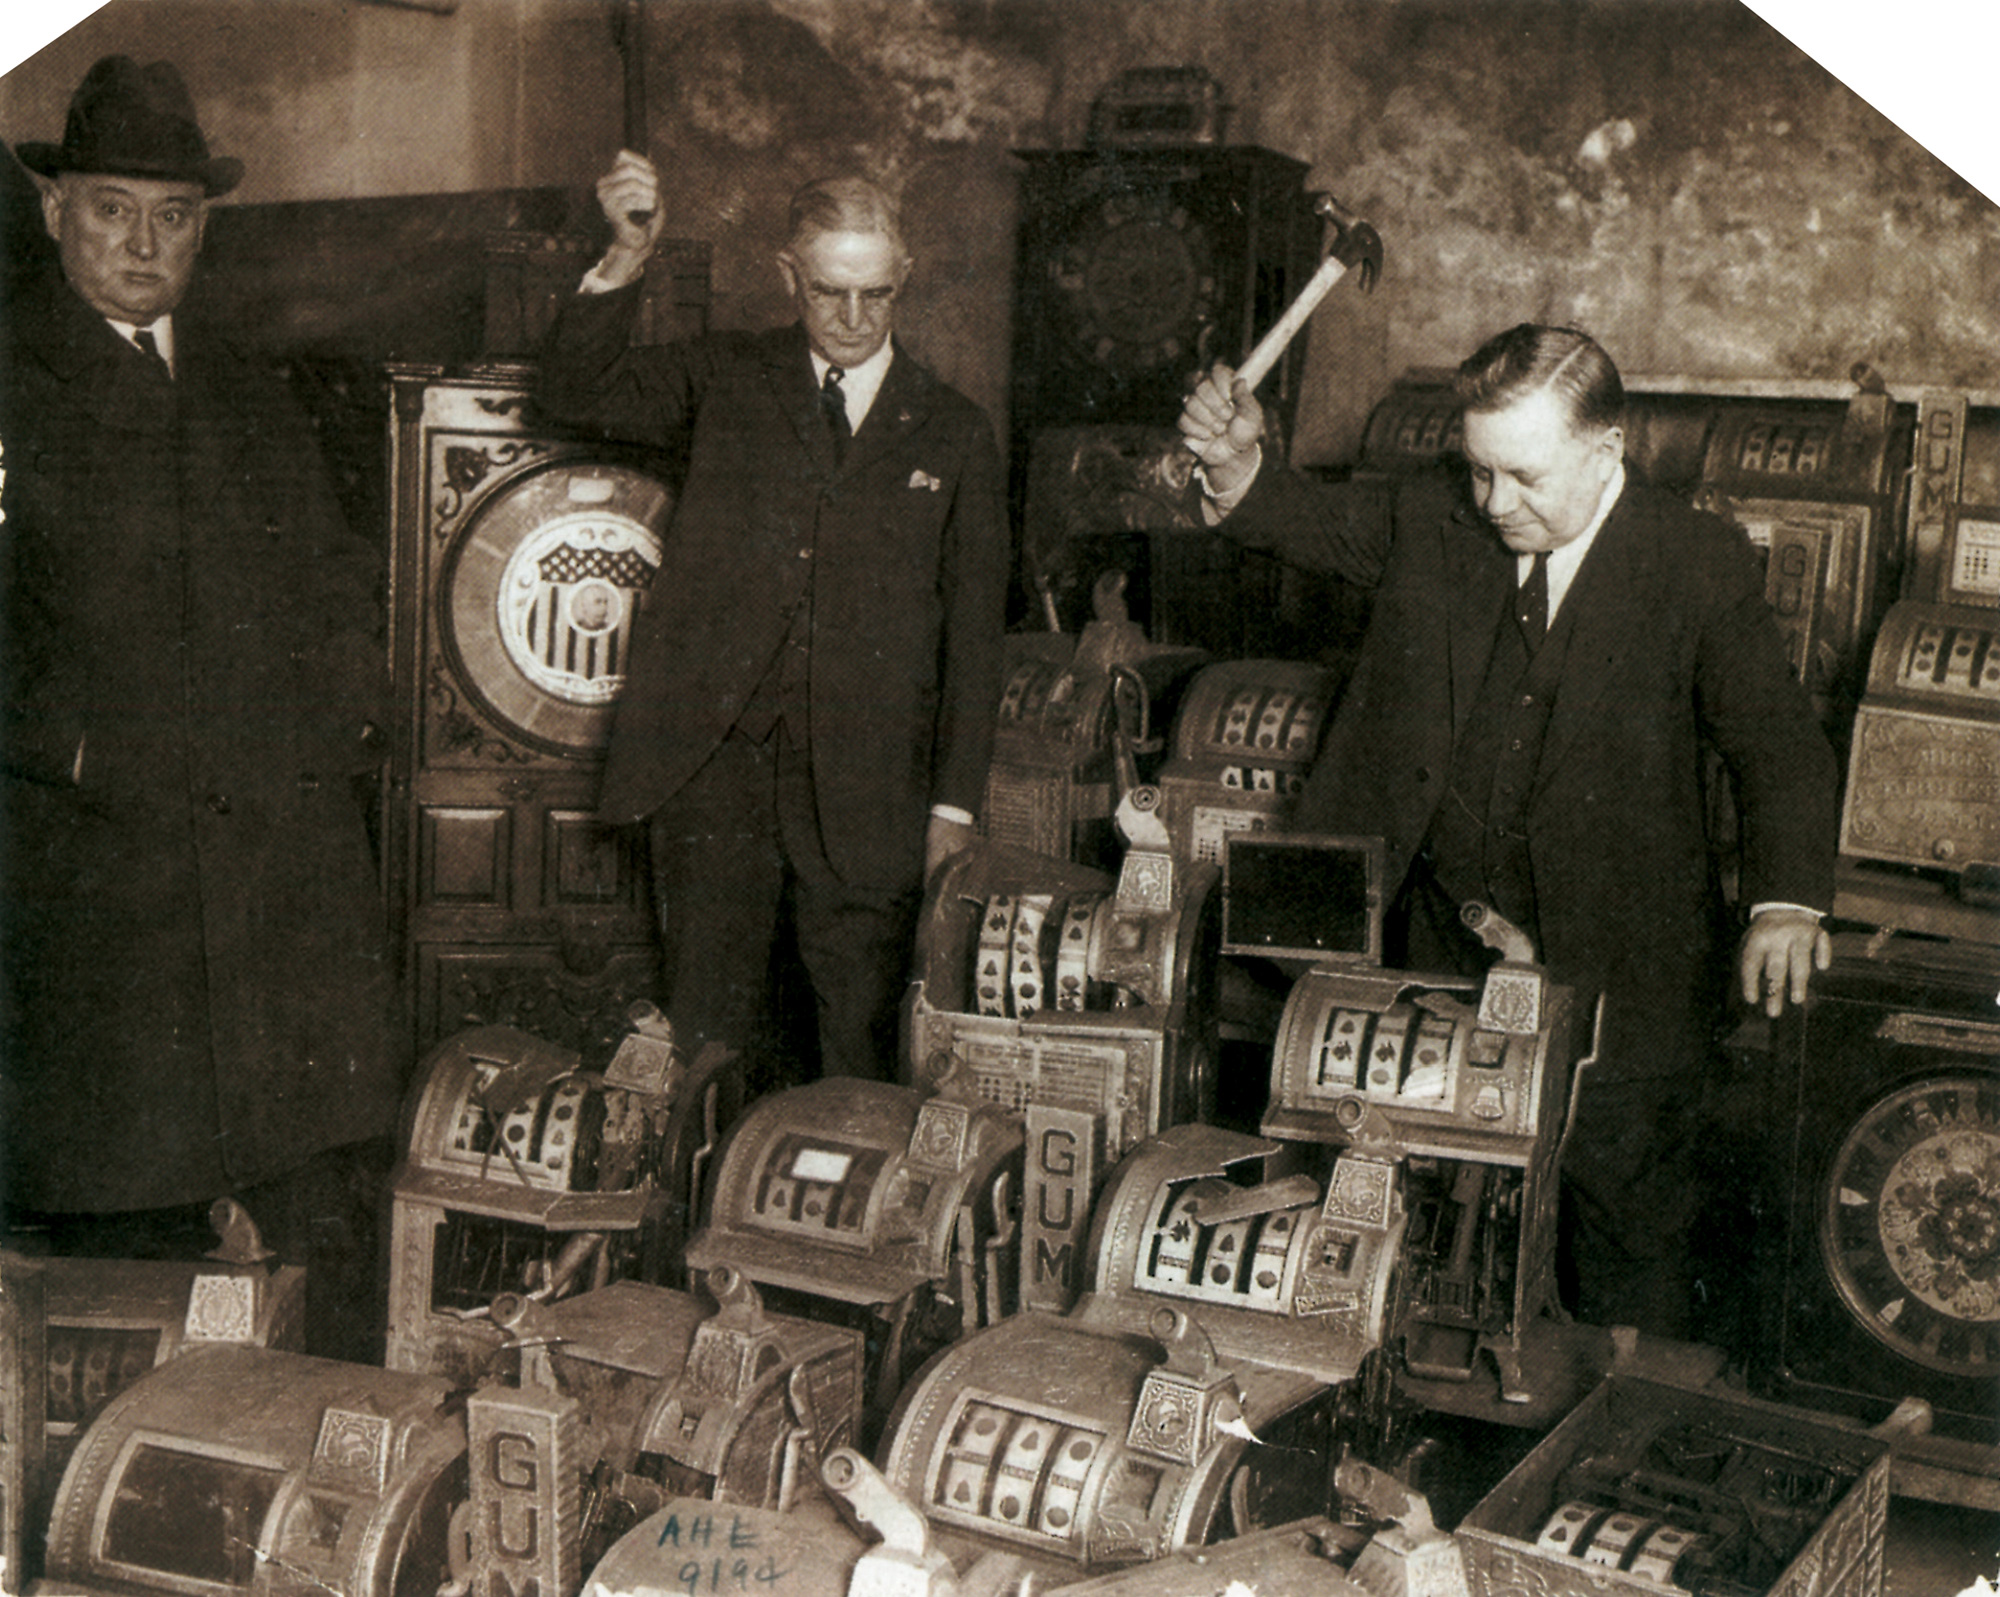 Illegal slot machines being destroyed by Chicago law enforcement, ca. 1930.